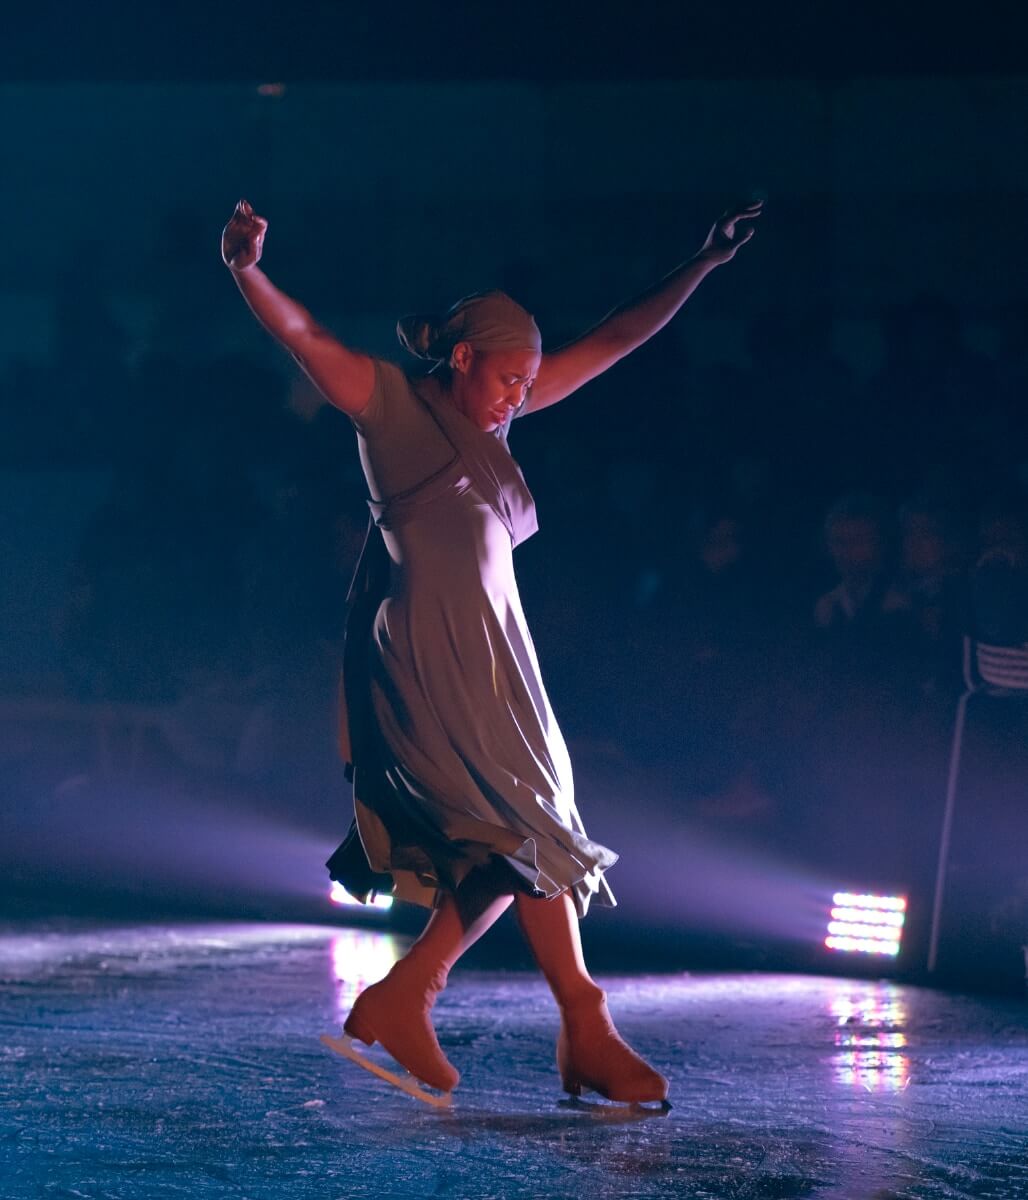 A Black woman on the ice in figure skates mid-movement balancing on the toe pick of her left skate while extending her right foot forward with both arms extending over head. She is wearing a gray dress with a full skirt and matching gray headwrap.